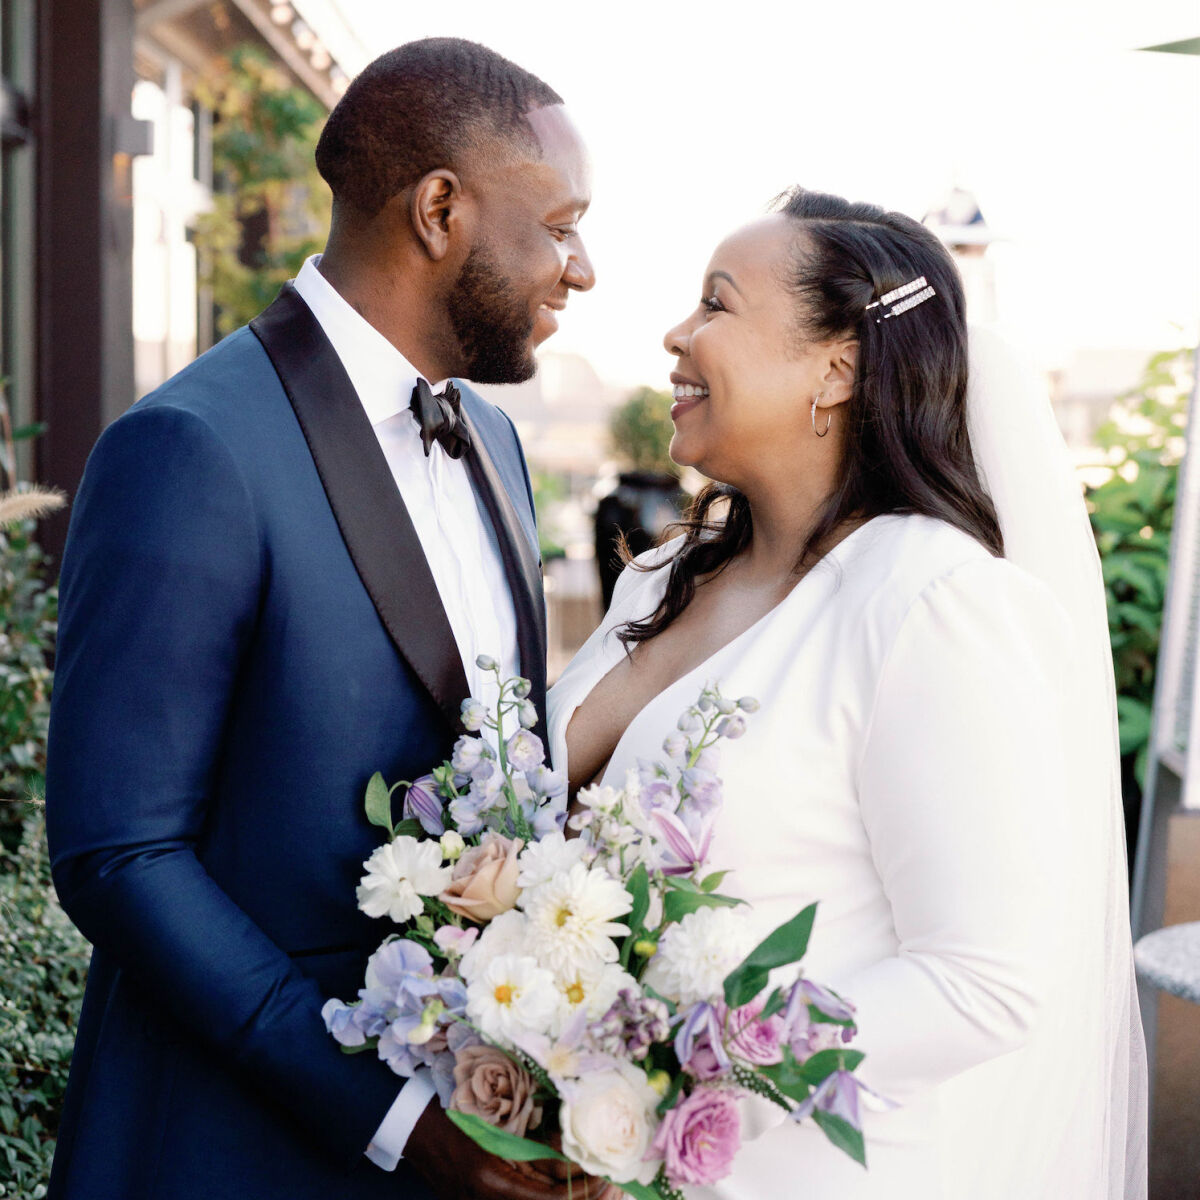 A smiling groom and bride look at each other at their DC elopement wedding.